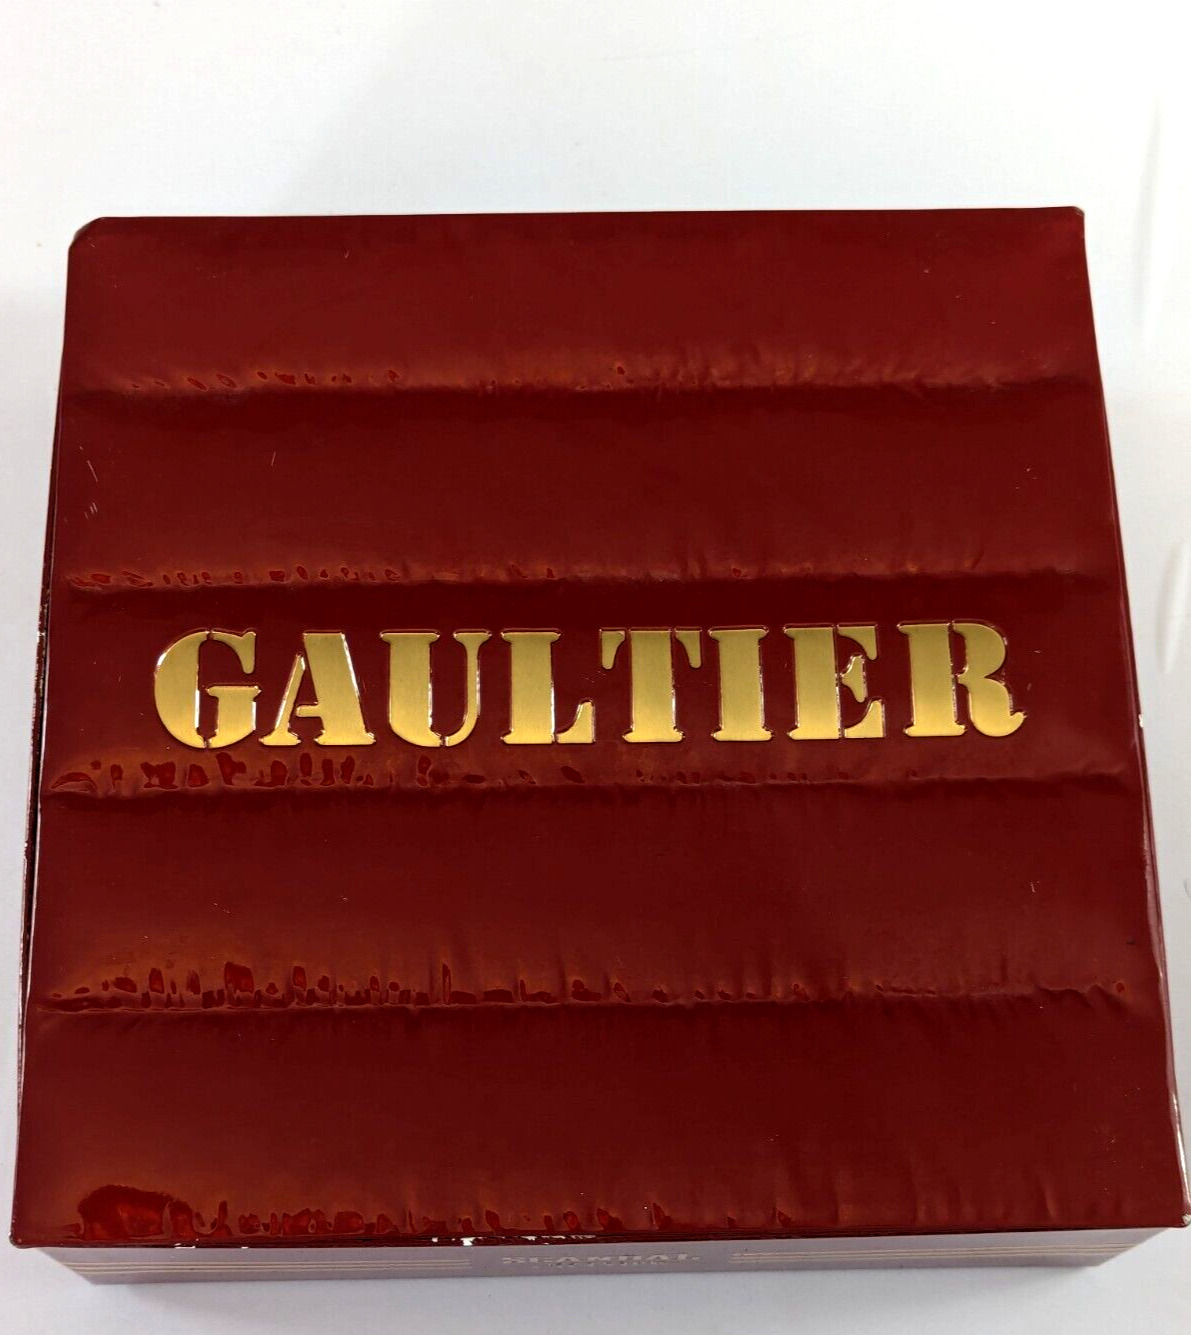 Jean Paul Gaultier Scandal Metal Box ONLY no contents Display